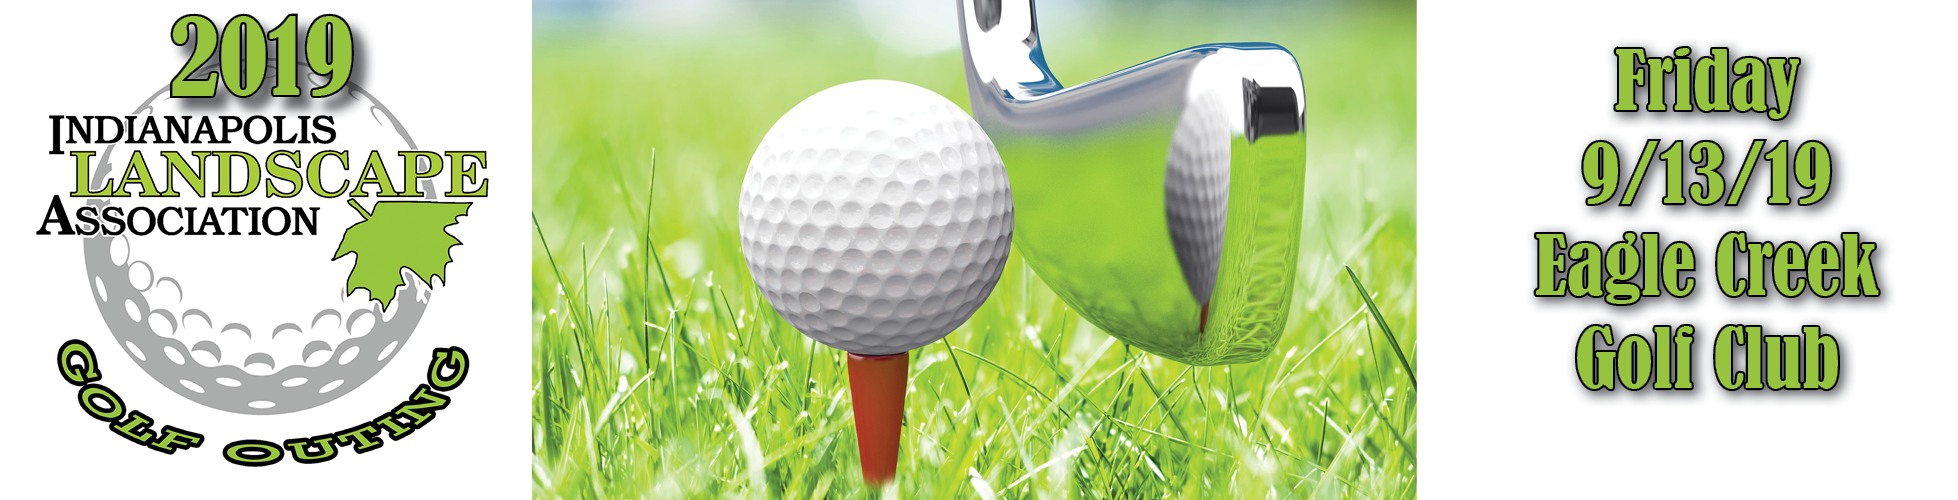 2019 ILA Golf Outing Registration and Sponsorships